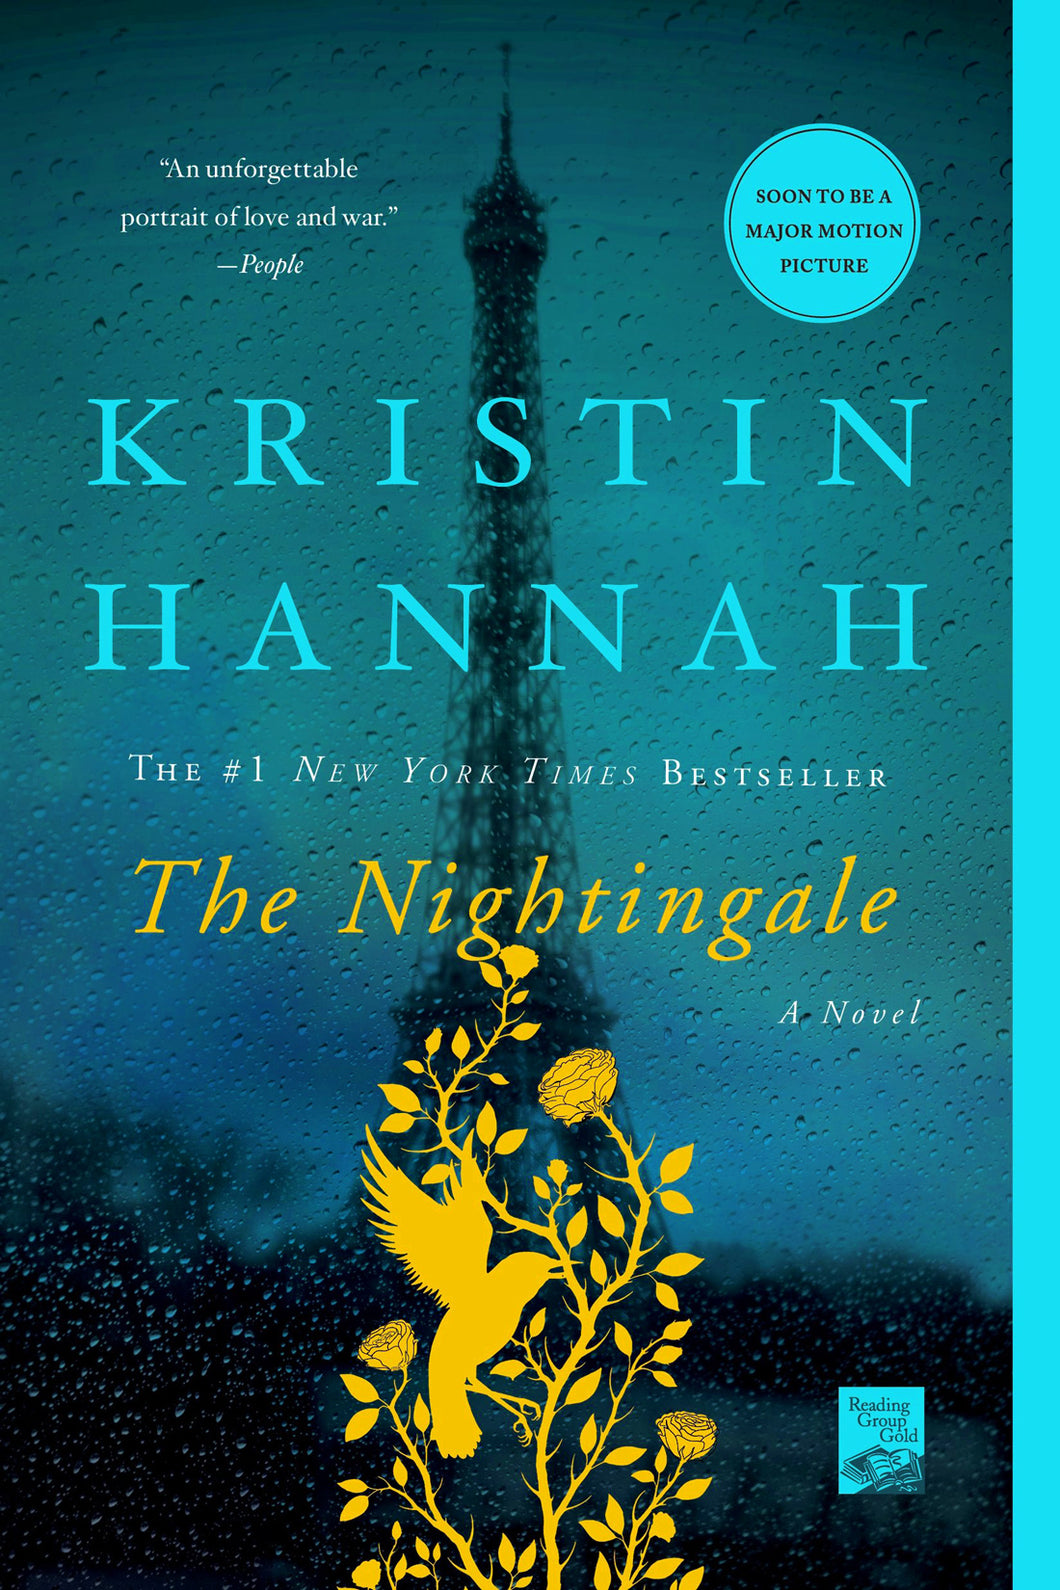 The Nightingale by Kristin Hannah / Hardcover or Paperback - NEW BOOK OR BOOK BOX